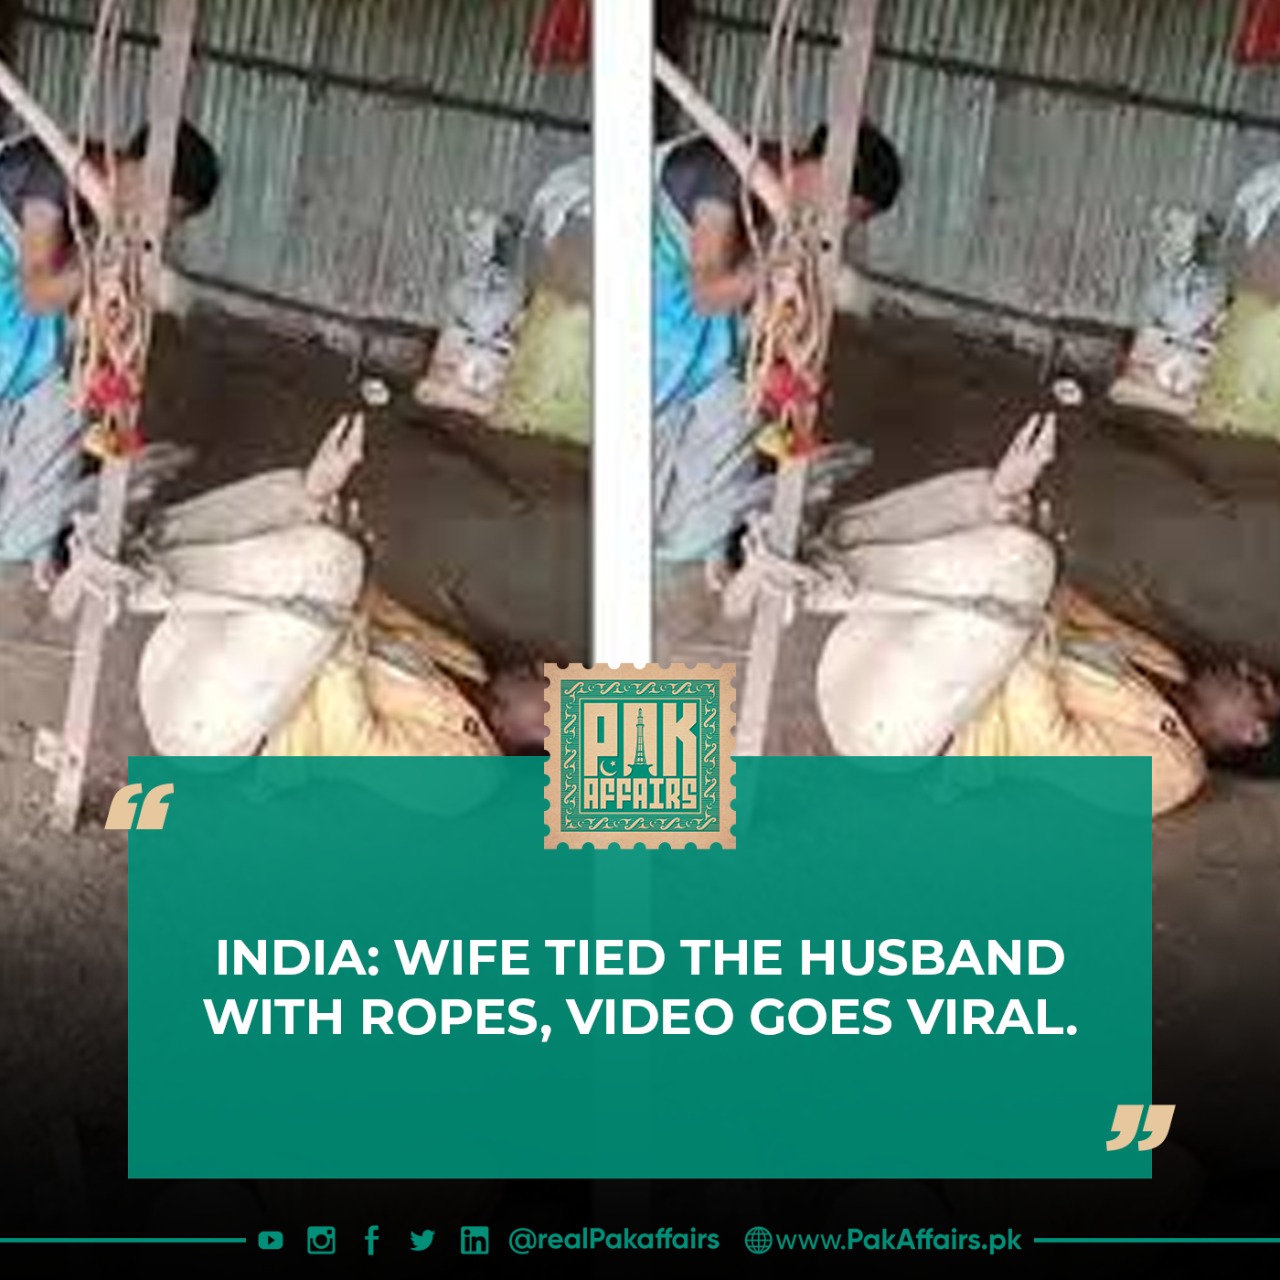 India: Wife tied the husband with ropes, video goes viral.